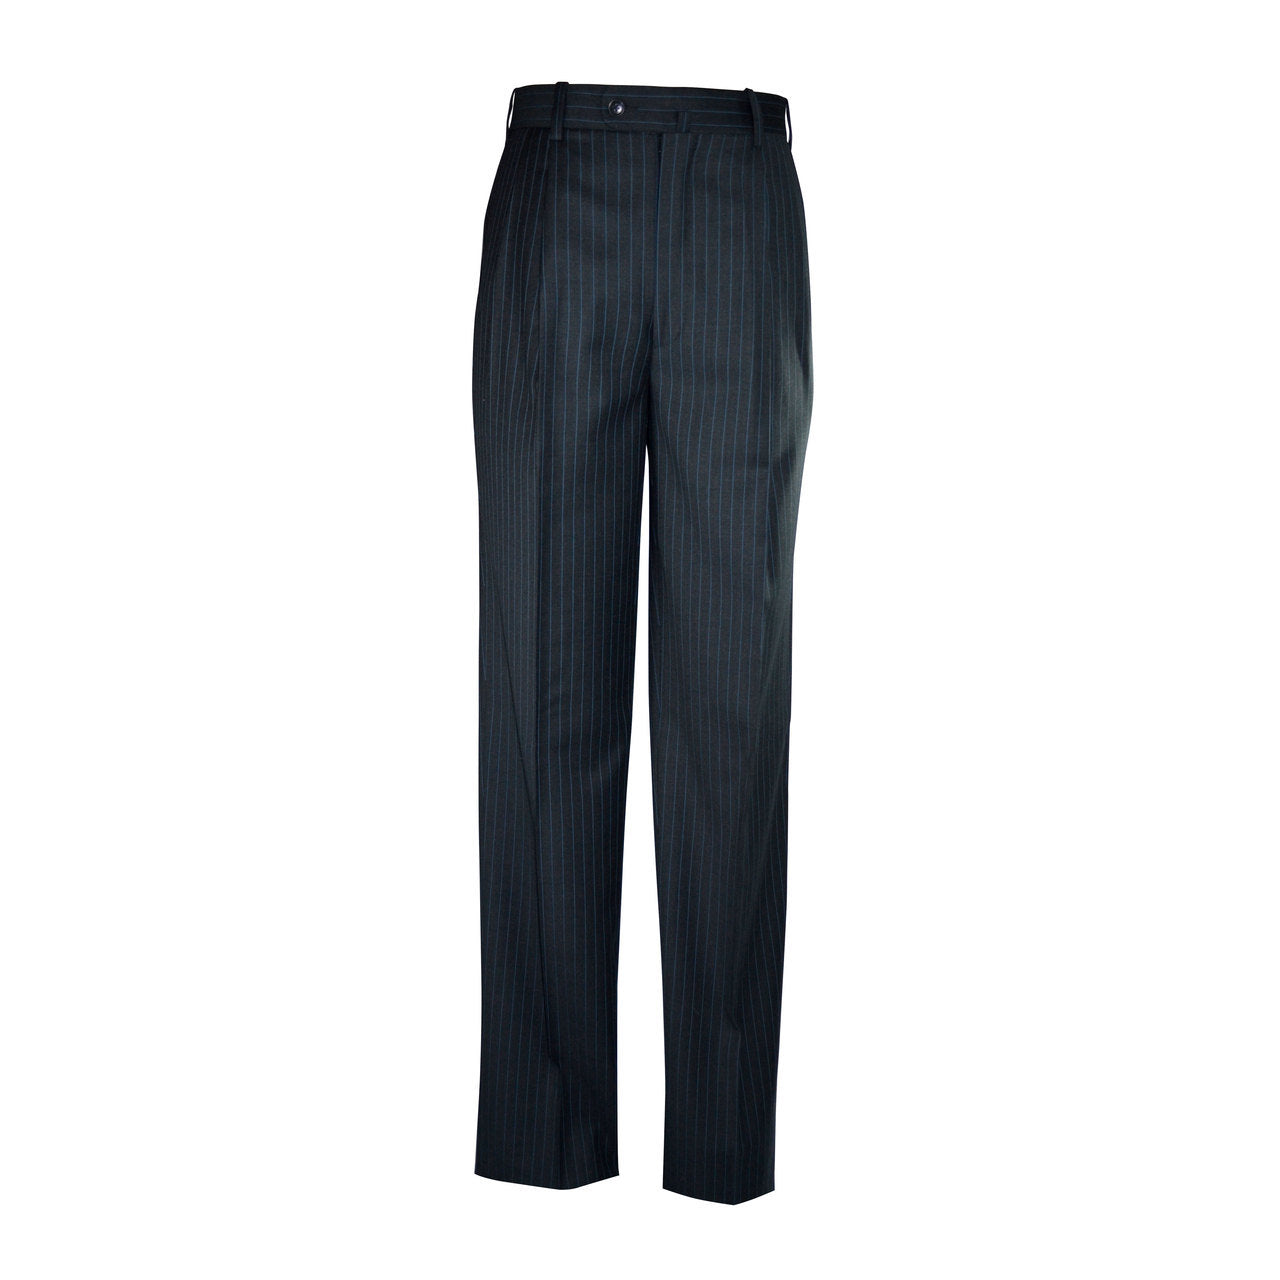 Newport Pleated Front Trouser - Charcoal